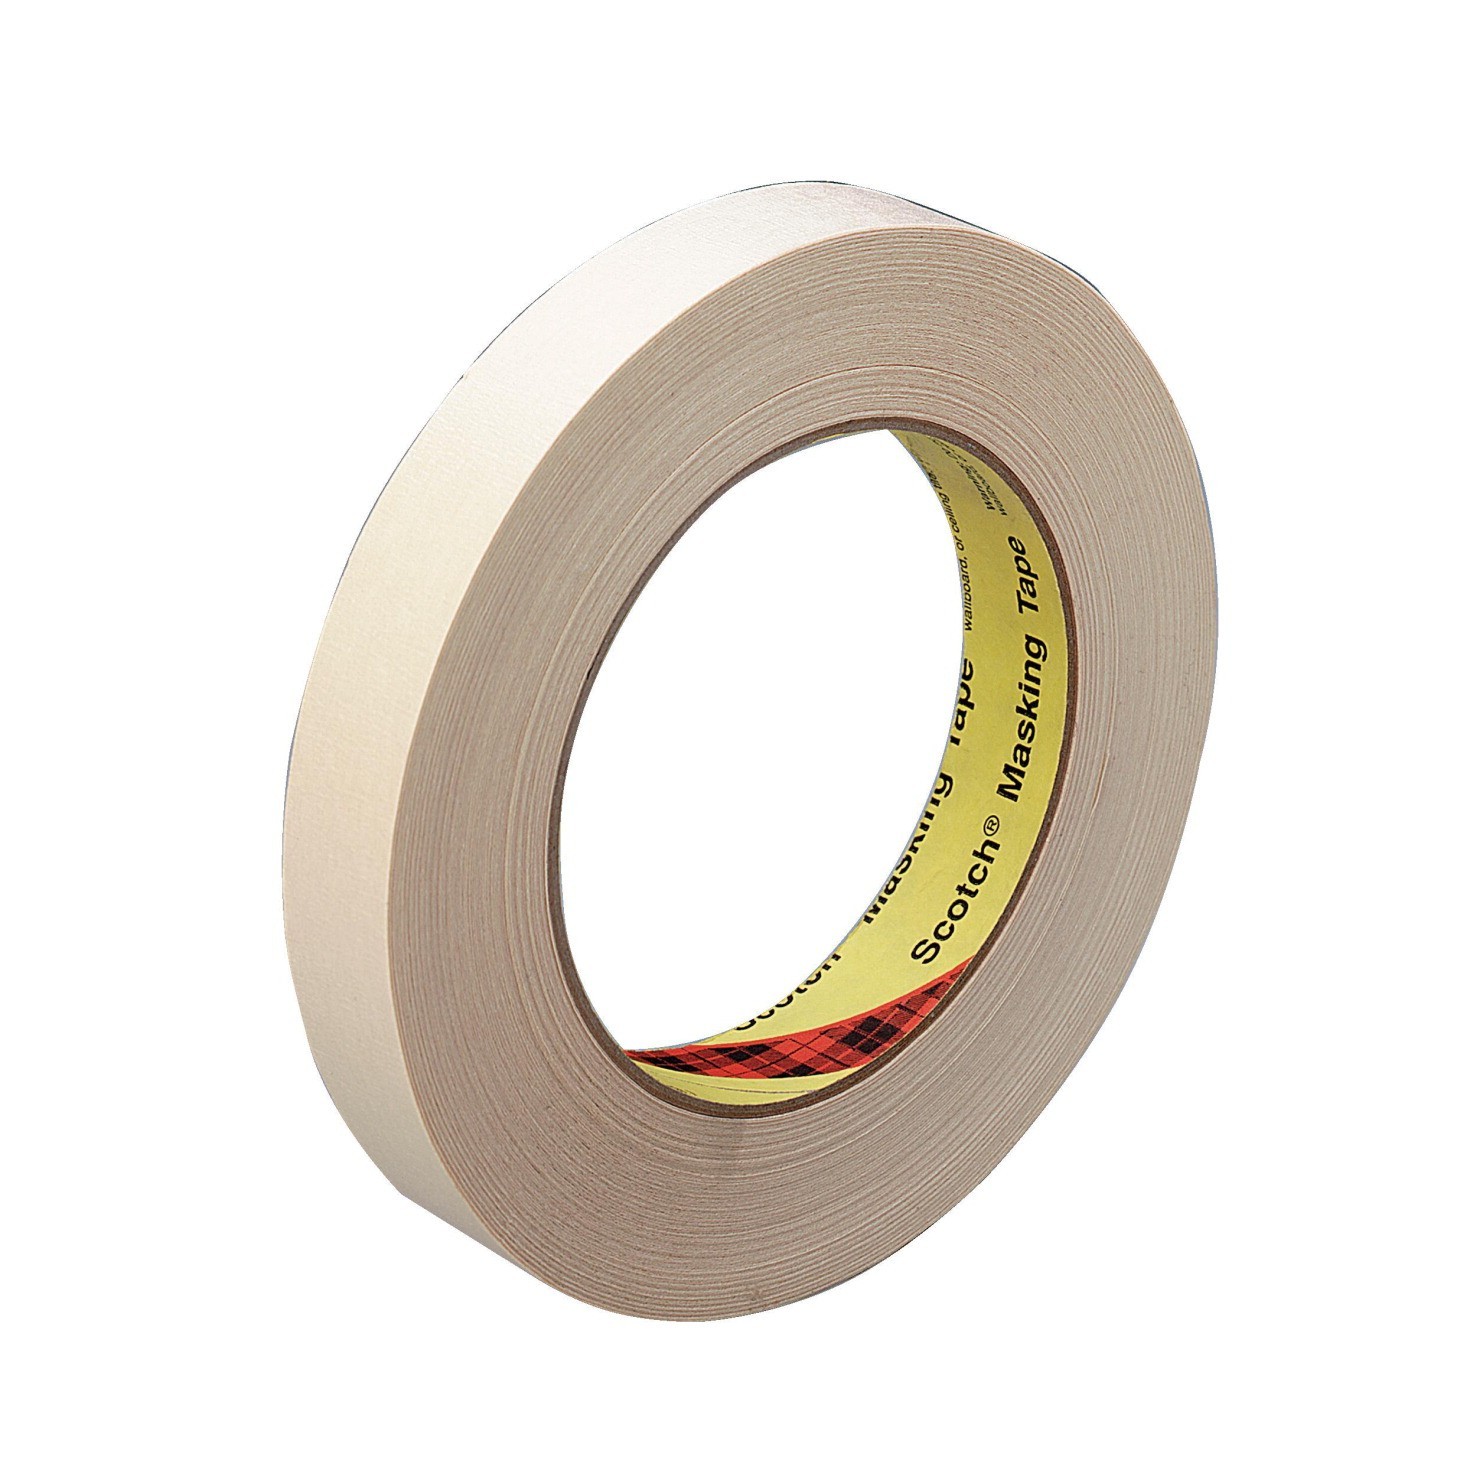 1" X 60 yds Scotch 232 High Performance Pressure Sensitive Self-Adhesive Masking Tape with 3" Core, Tan